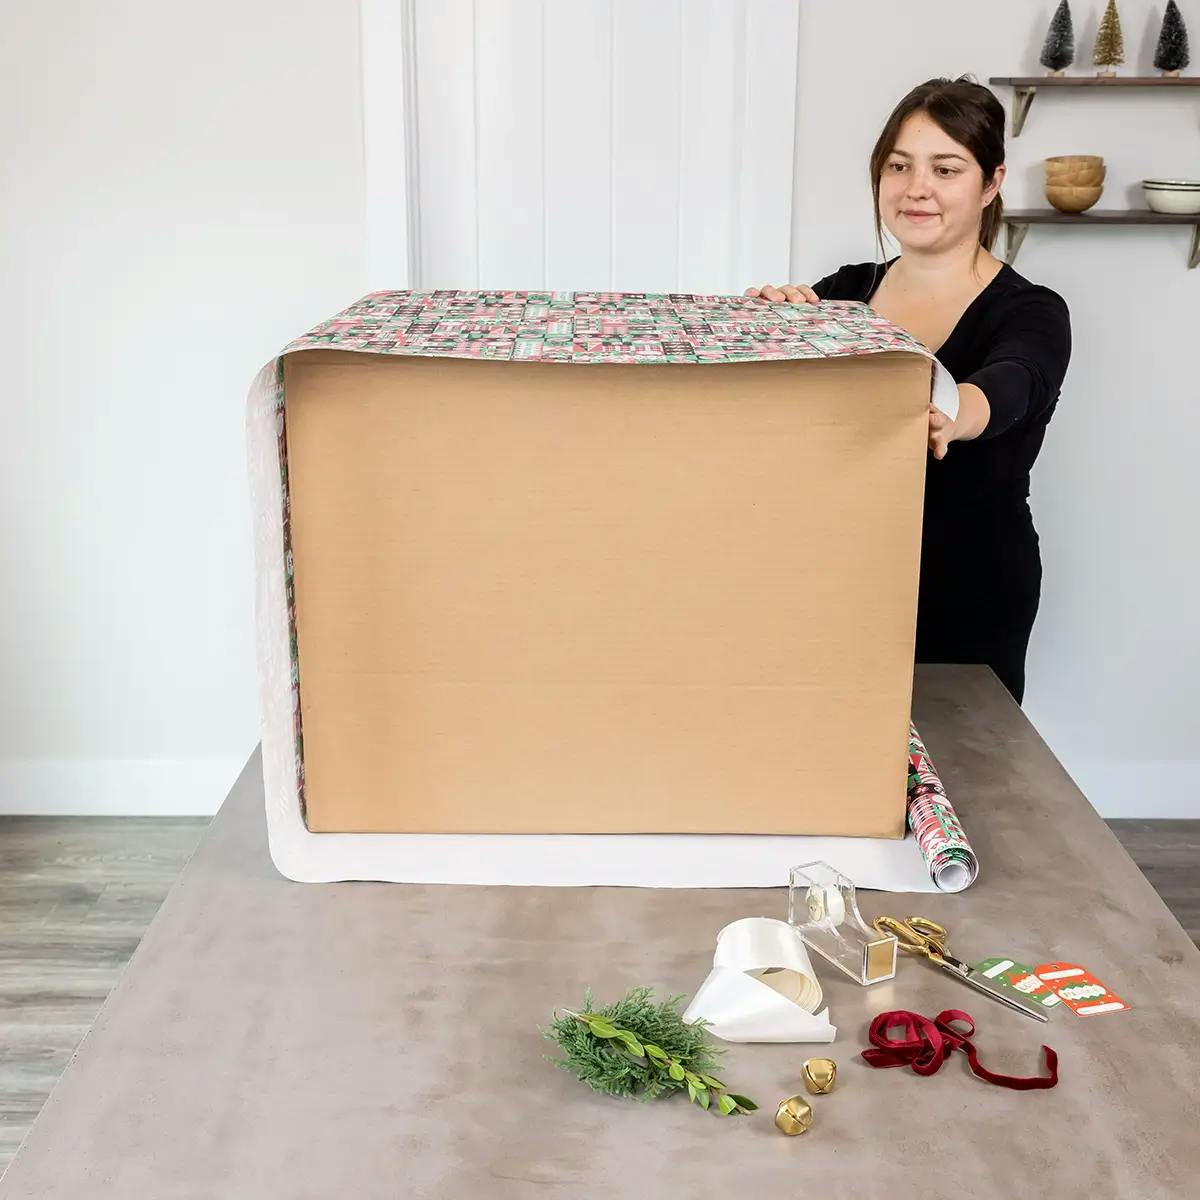 Securing wrapping paper to a large box.